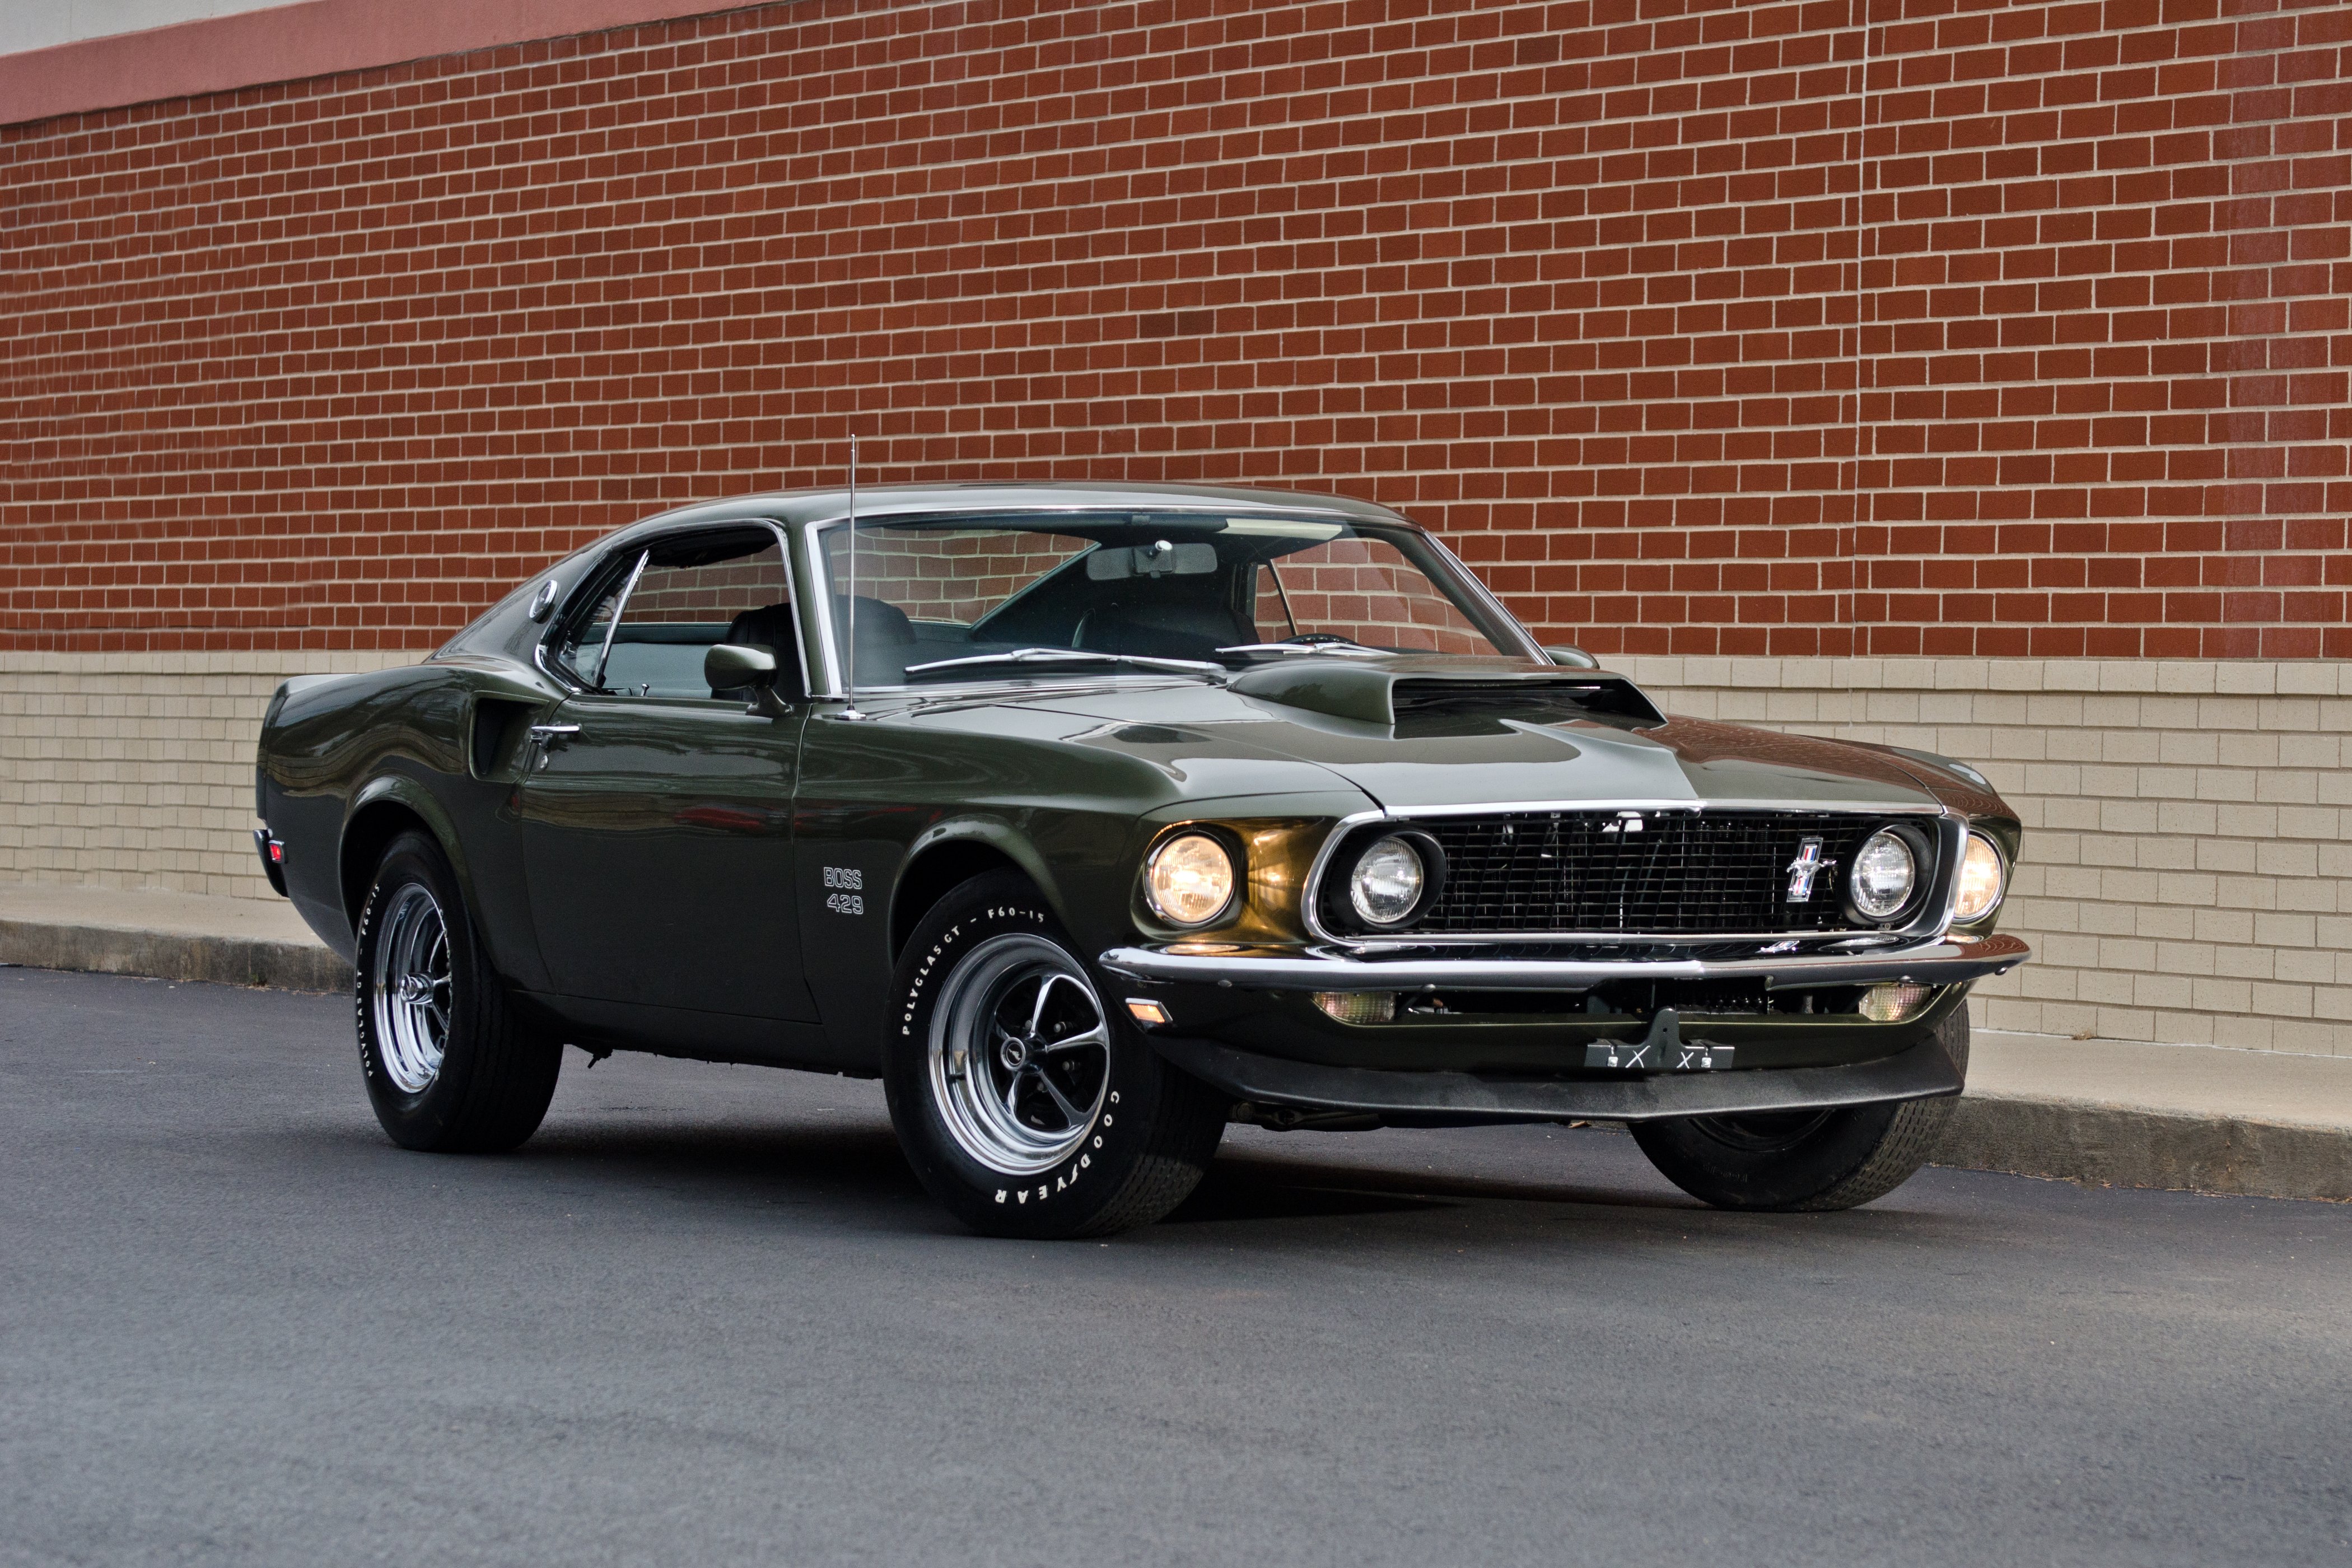 647340-1969-ford-mustang-boss-429-fastback-muscle-classic-usa-4200x2790-13.jpg